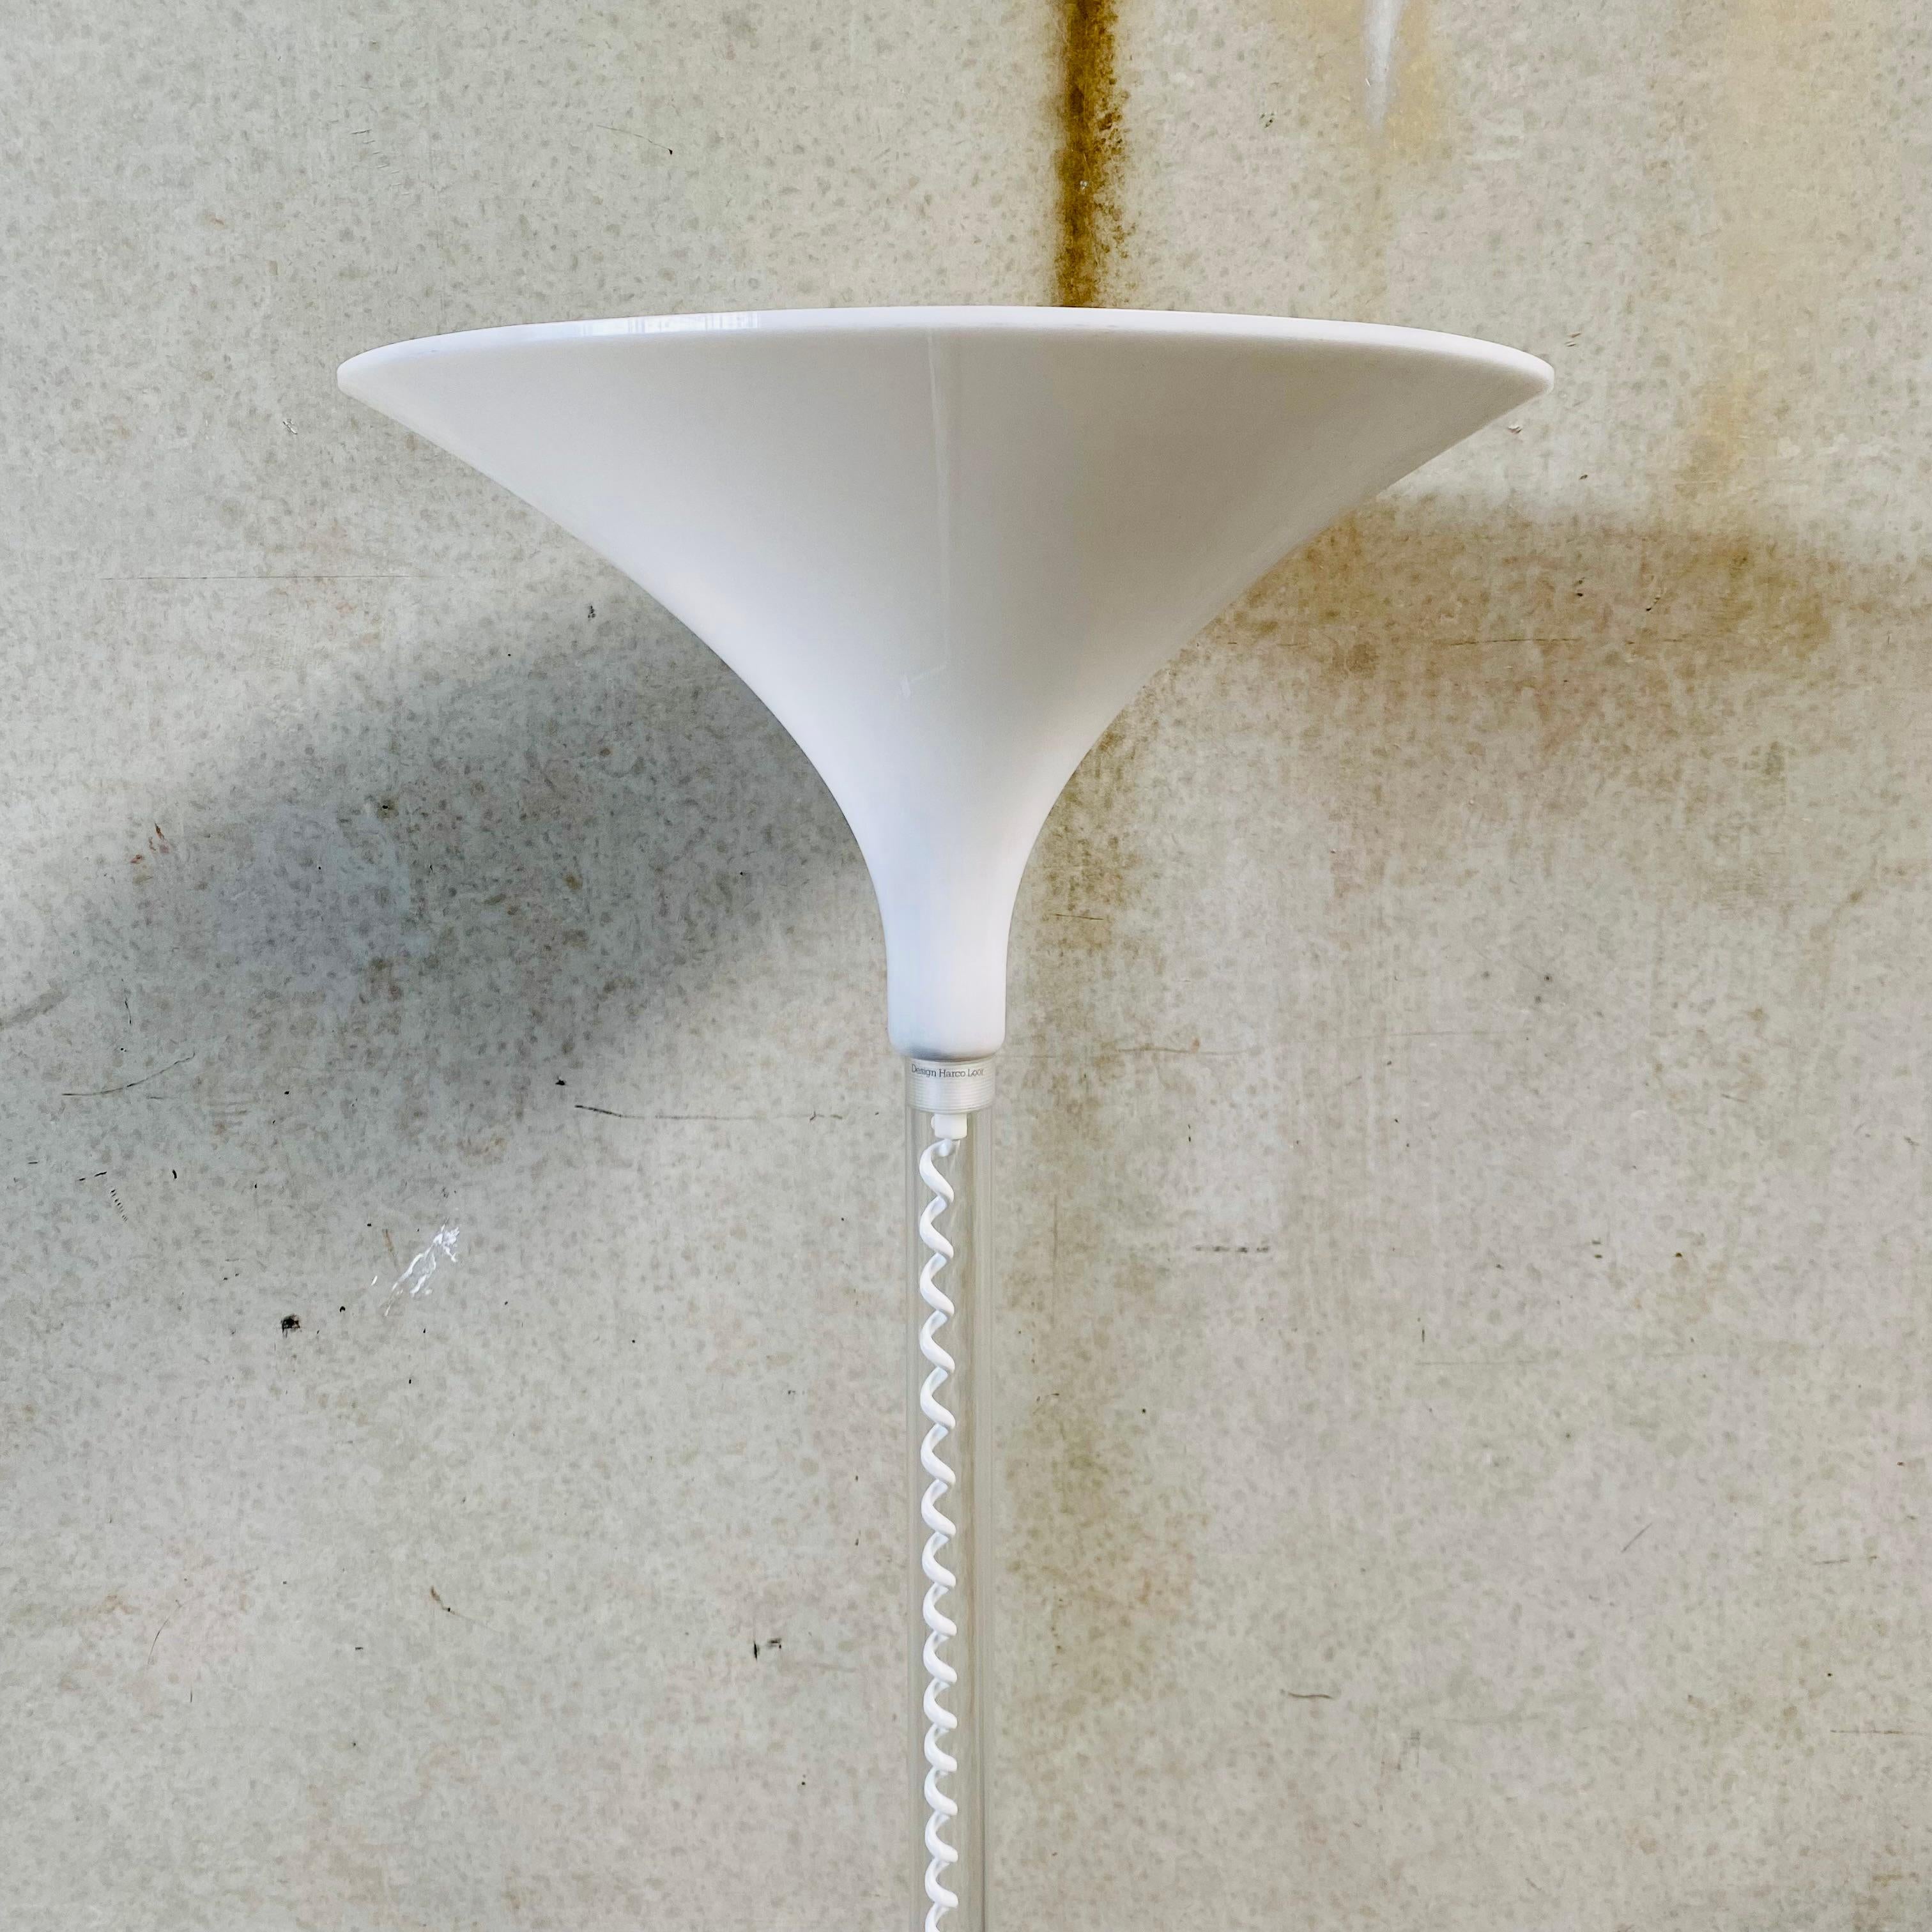 Dutch Mid-century lucite Floor Lamp by Harco Loor, the Netherlands, 1980's For Sale